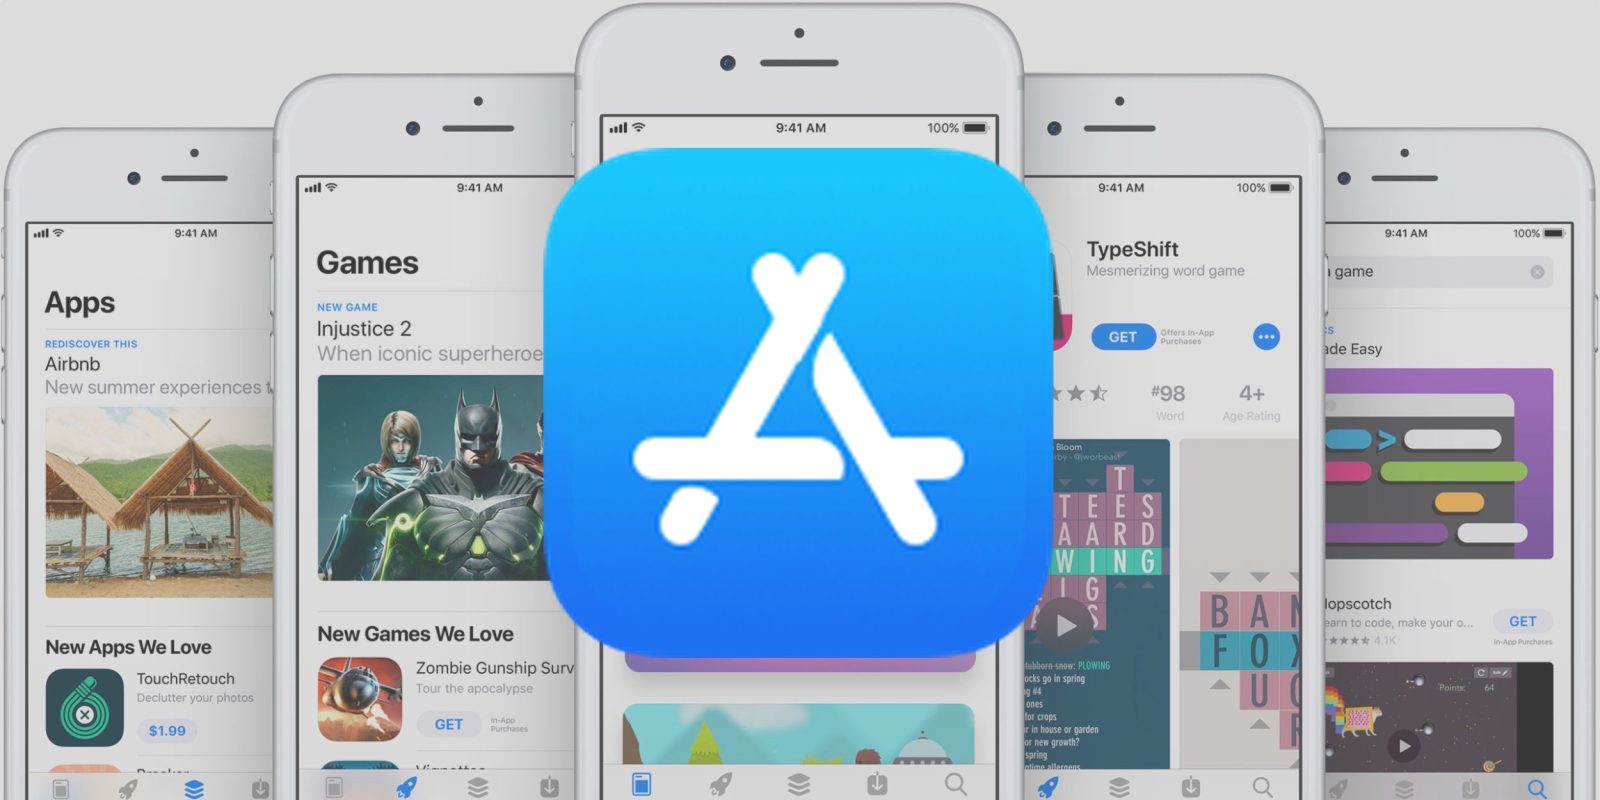 How To Card Apple App Store [Method 2] - NOODS GUIDE 